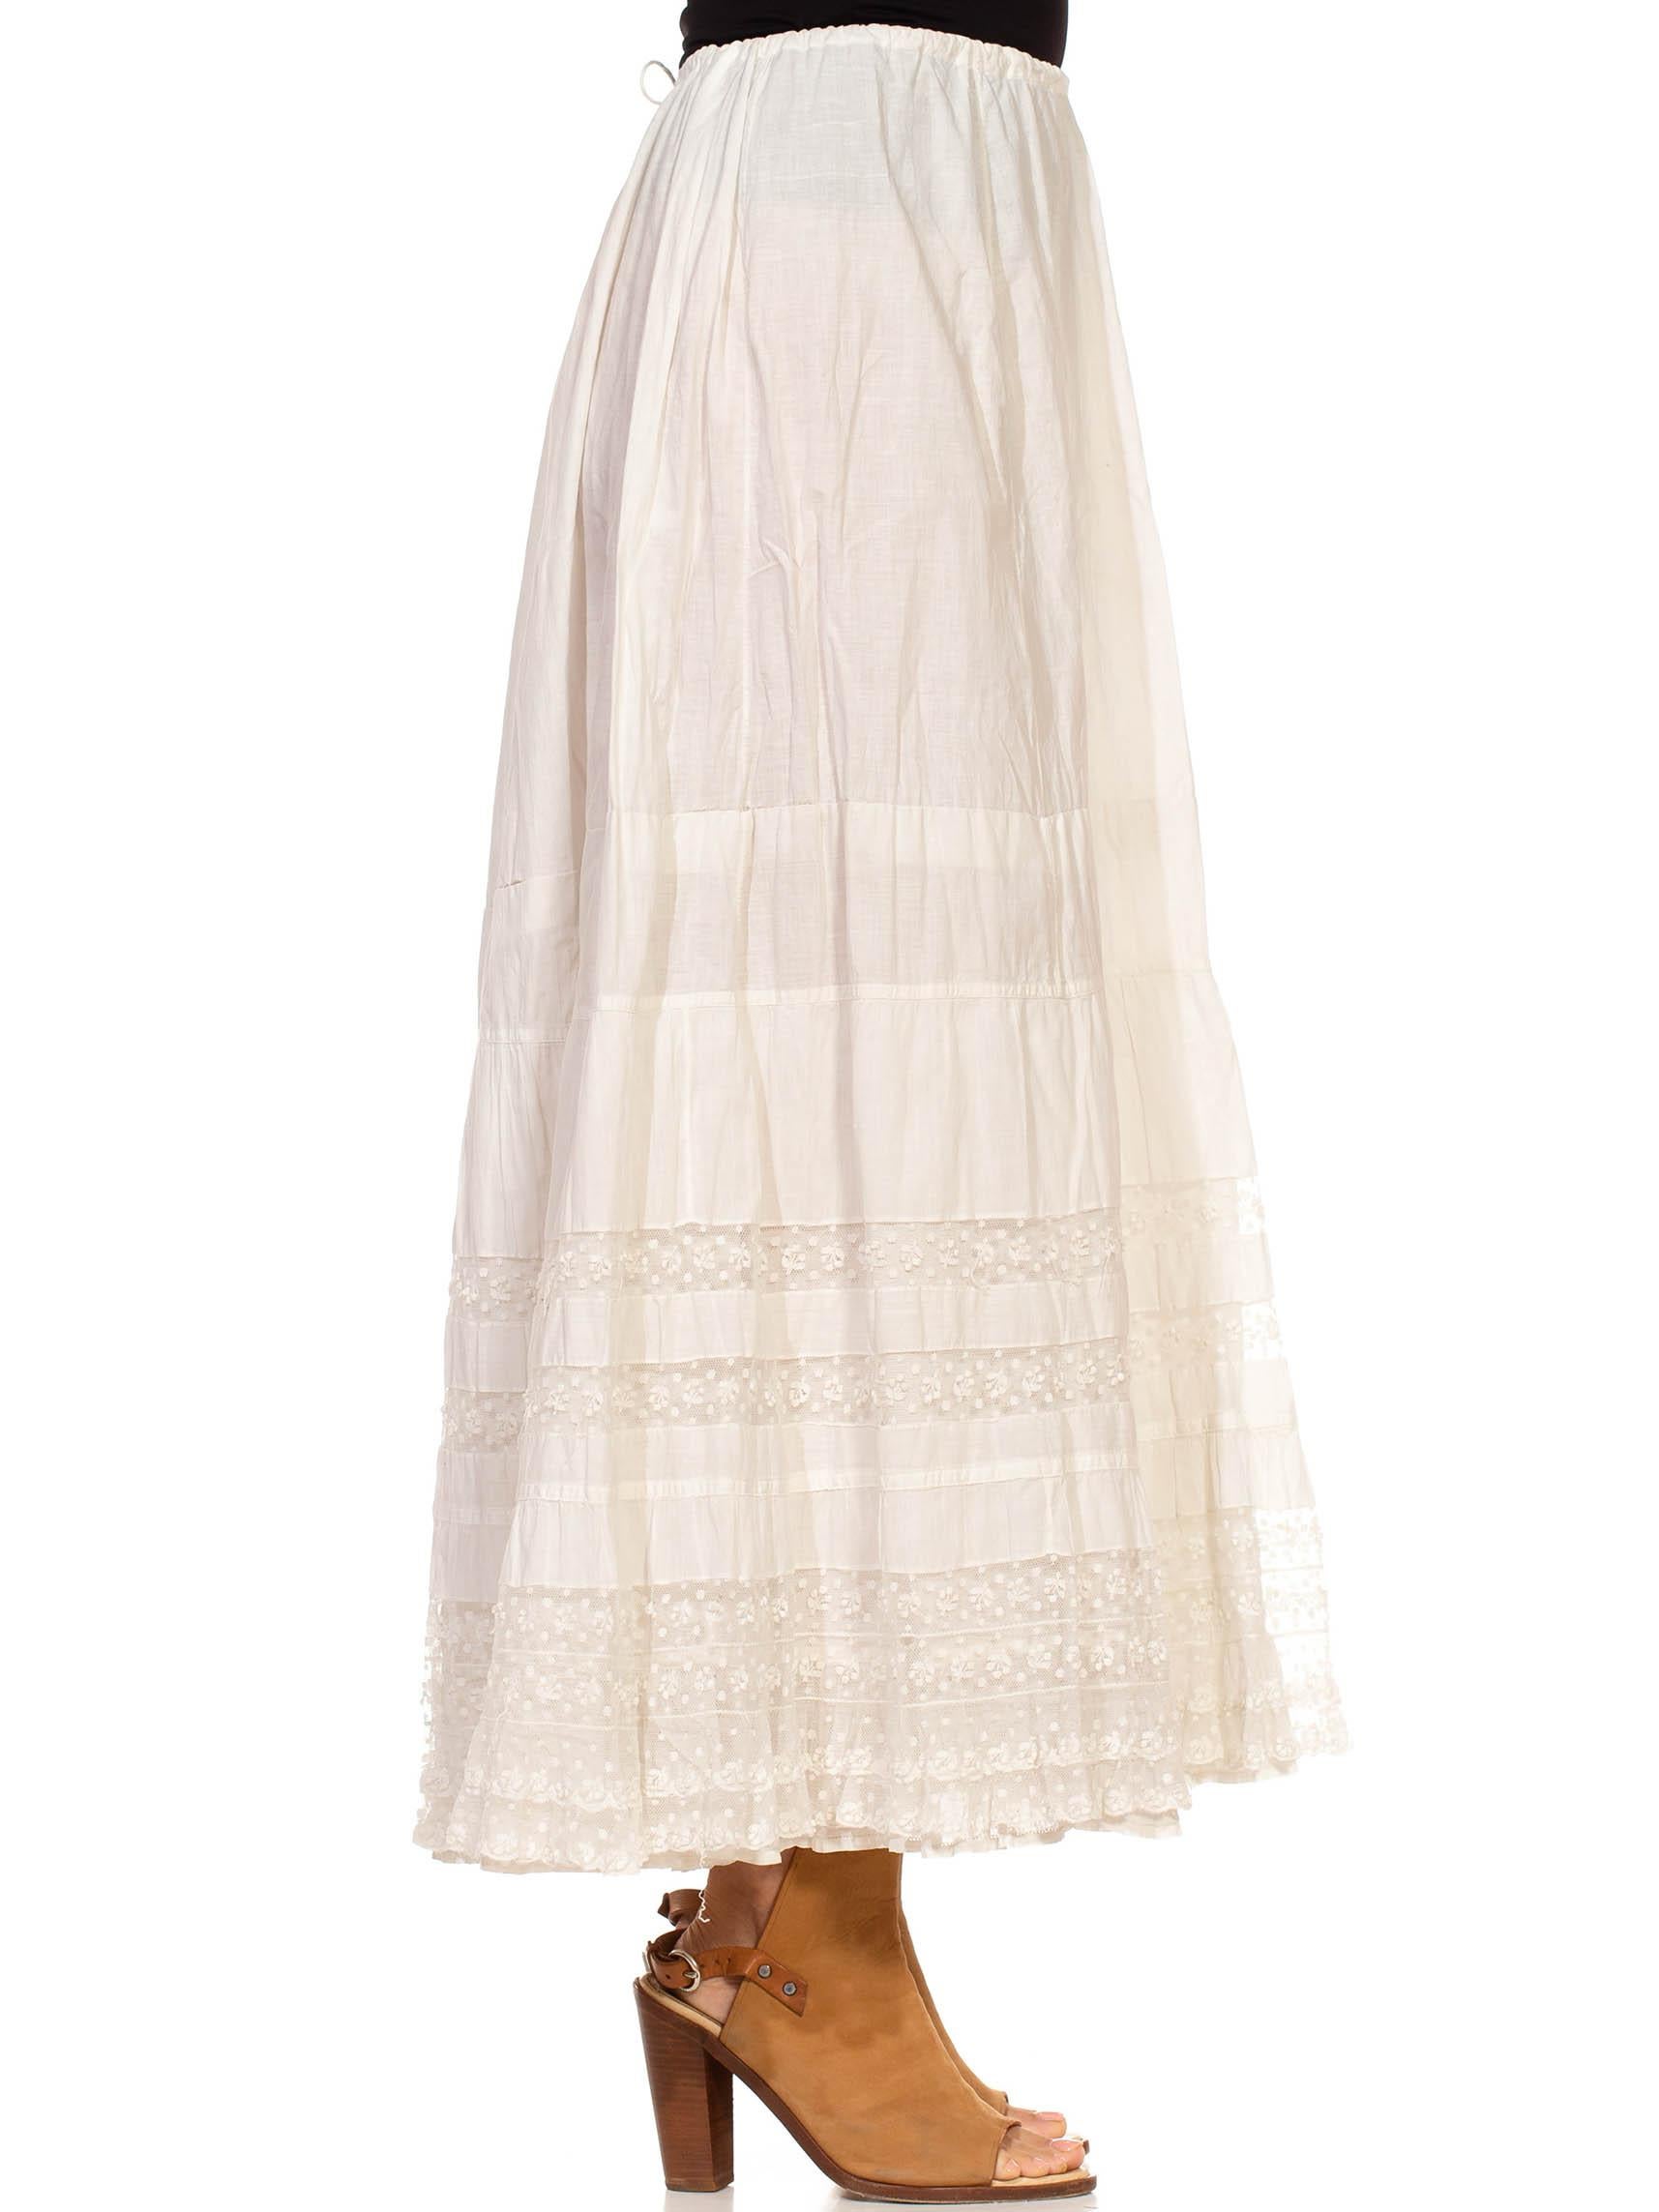 Adjustable waist Victorian White Organic Cotton Skirt With Cherry Lace 